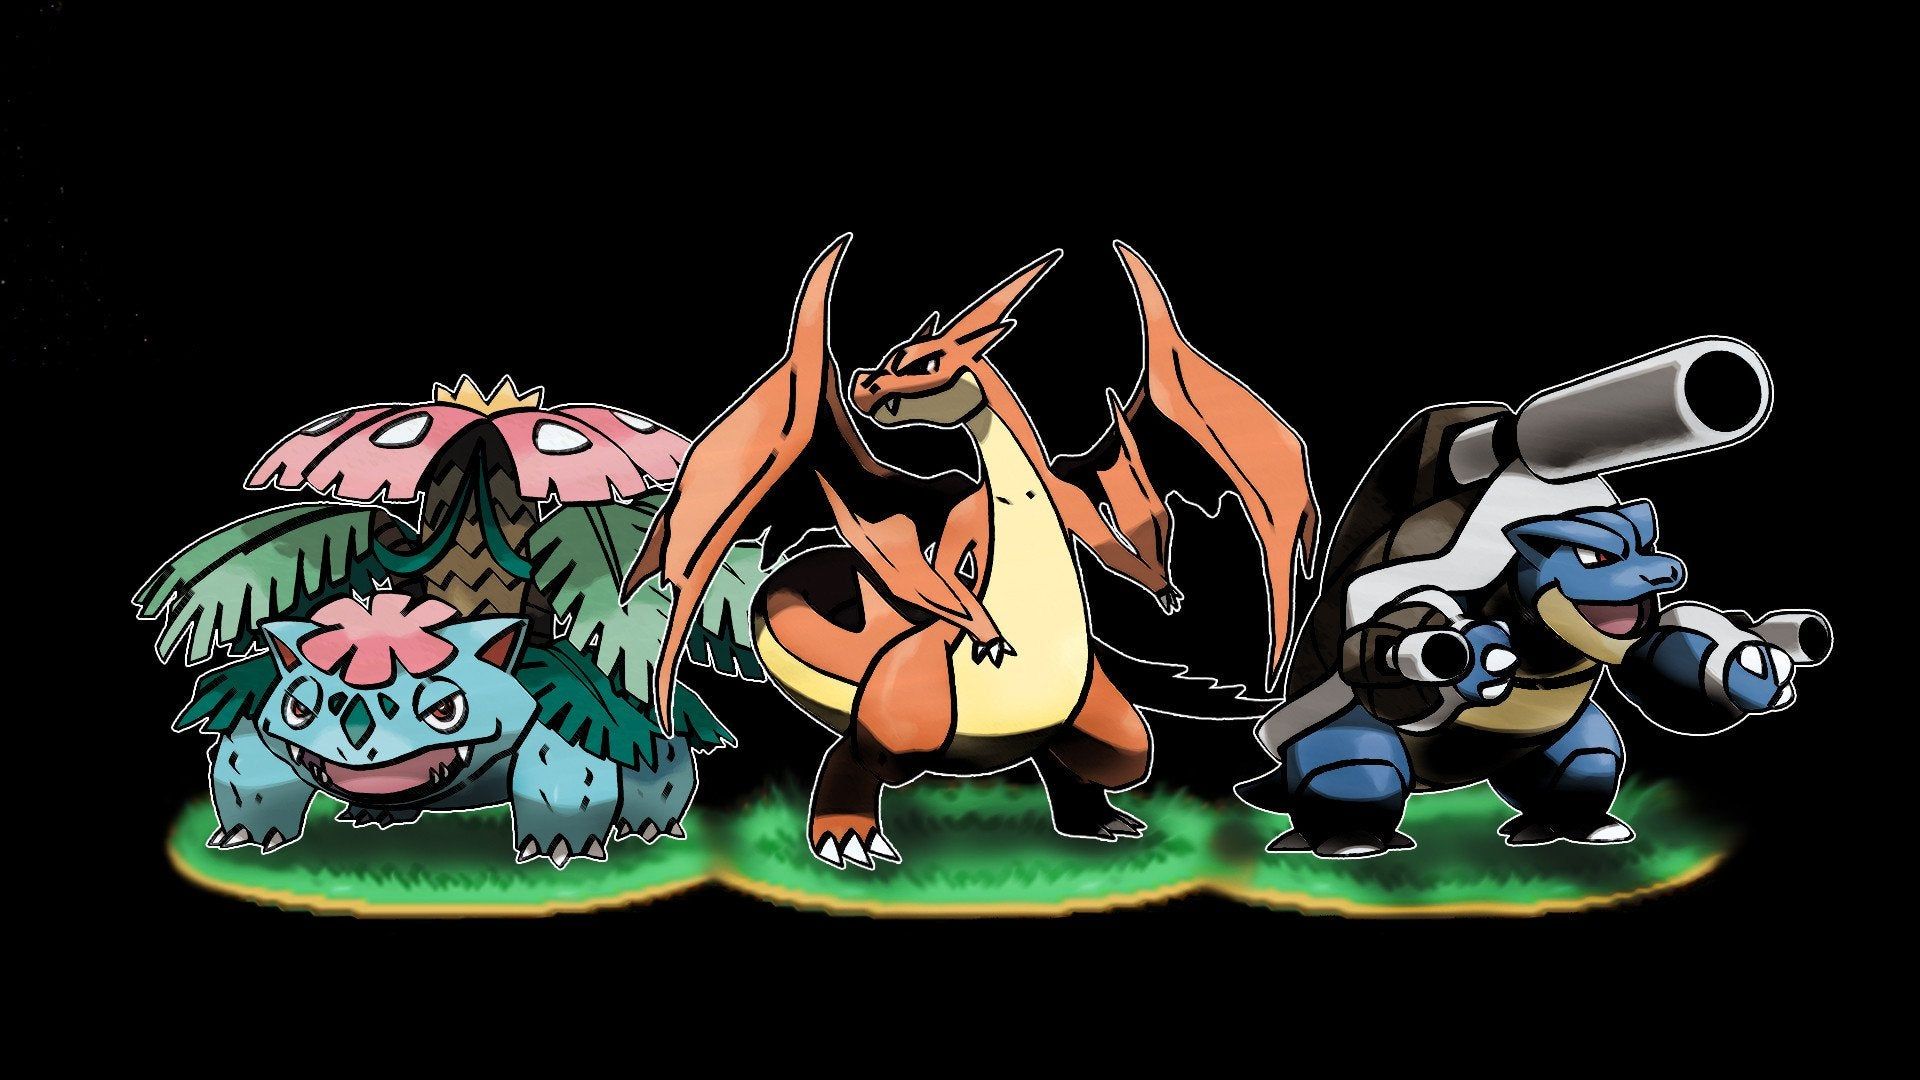 I Made A Wallpaper (1920x1080) Using The New Kanto Mega Evolutions. Thought I'd Share It.(#spoiler)